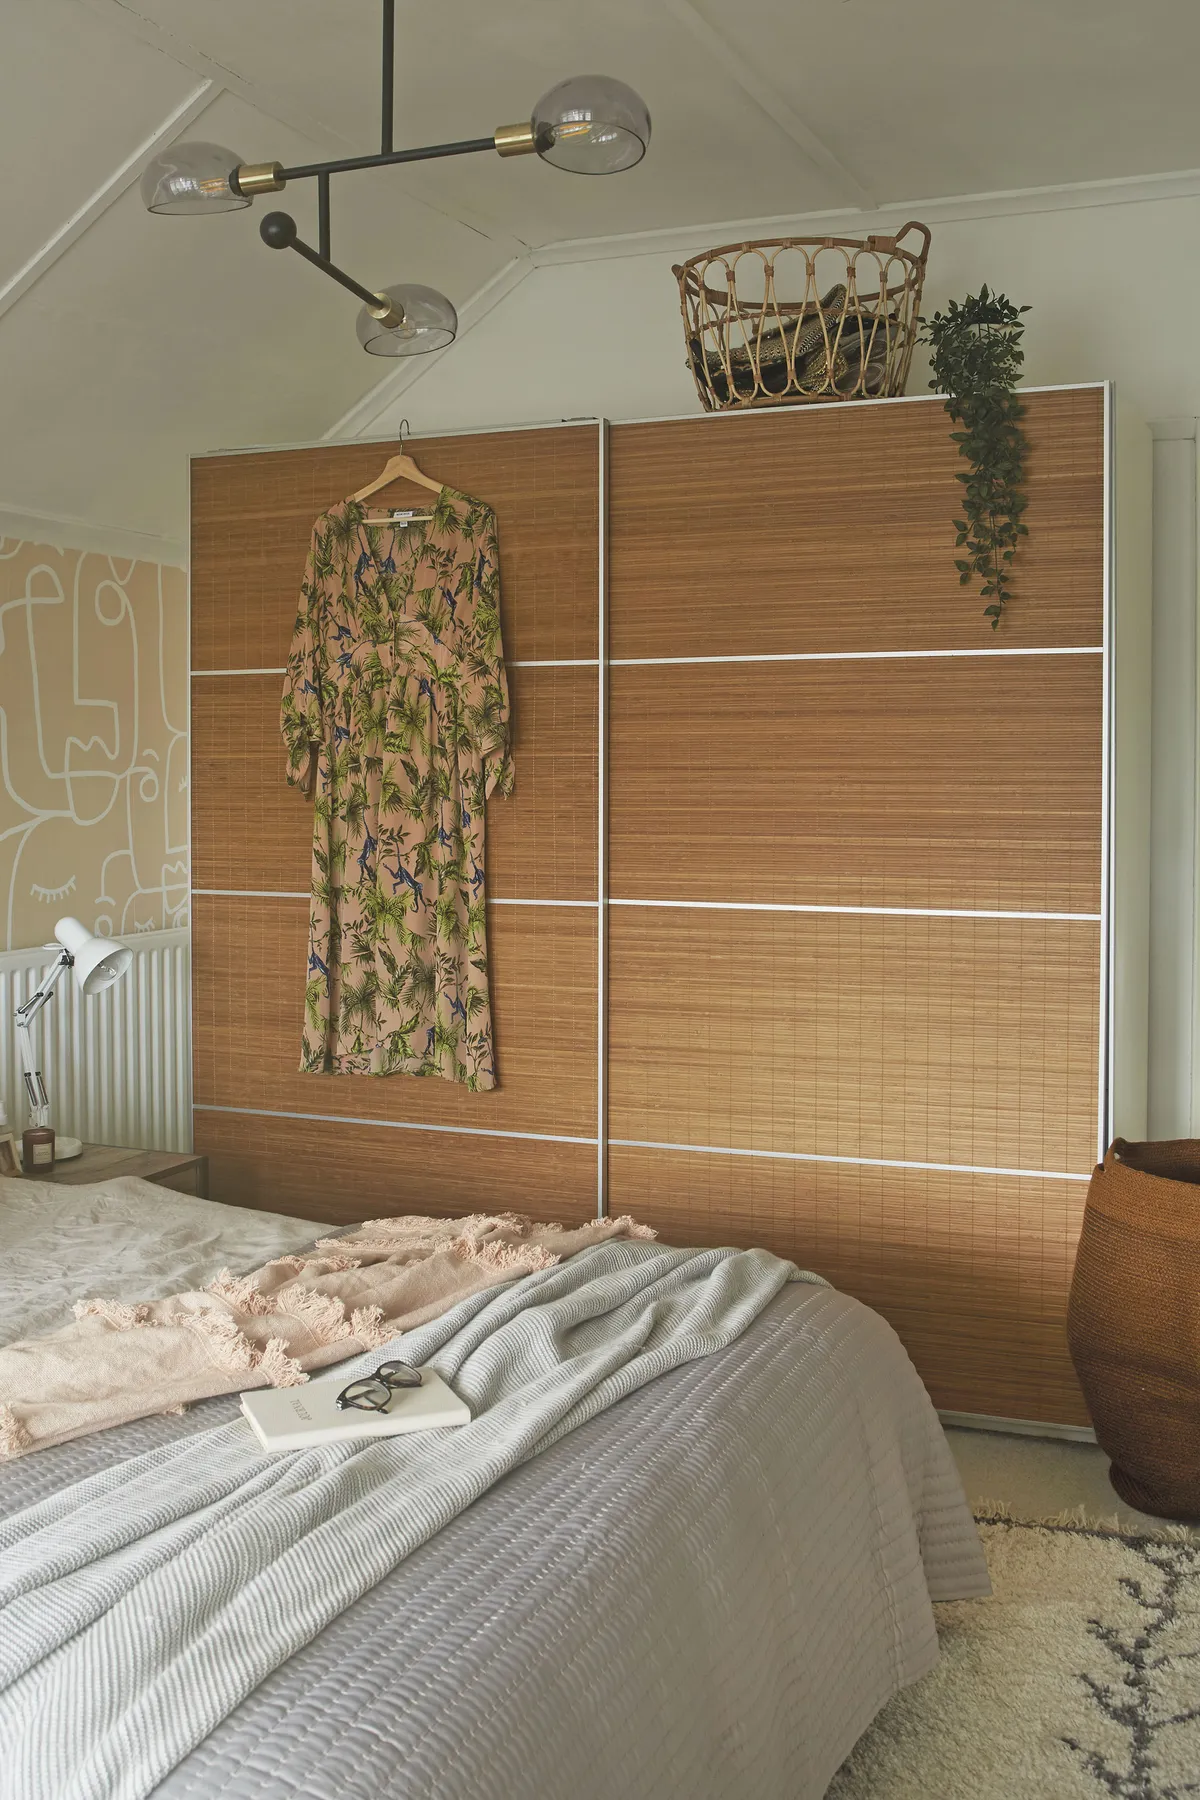 Ideally the couple would have liked to replace their old wardrobe with a built-in design, but it would have meant moving the radiator. Instead, they updated it with new bamboo panels from IKEA, which gave the wardrobe an entirely new look and helped keep costs down